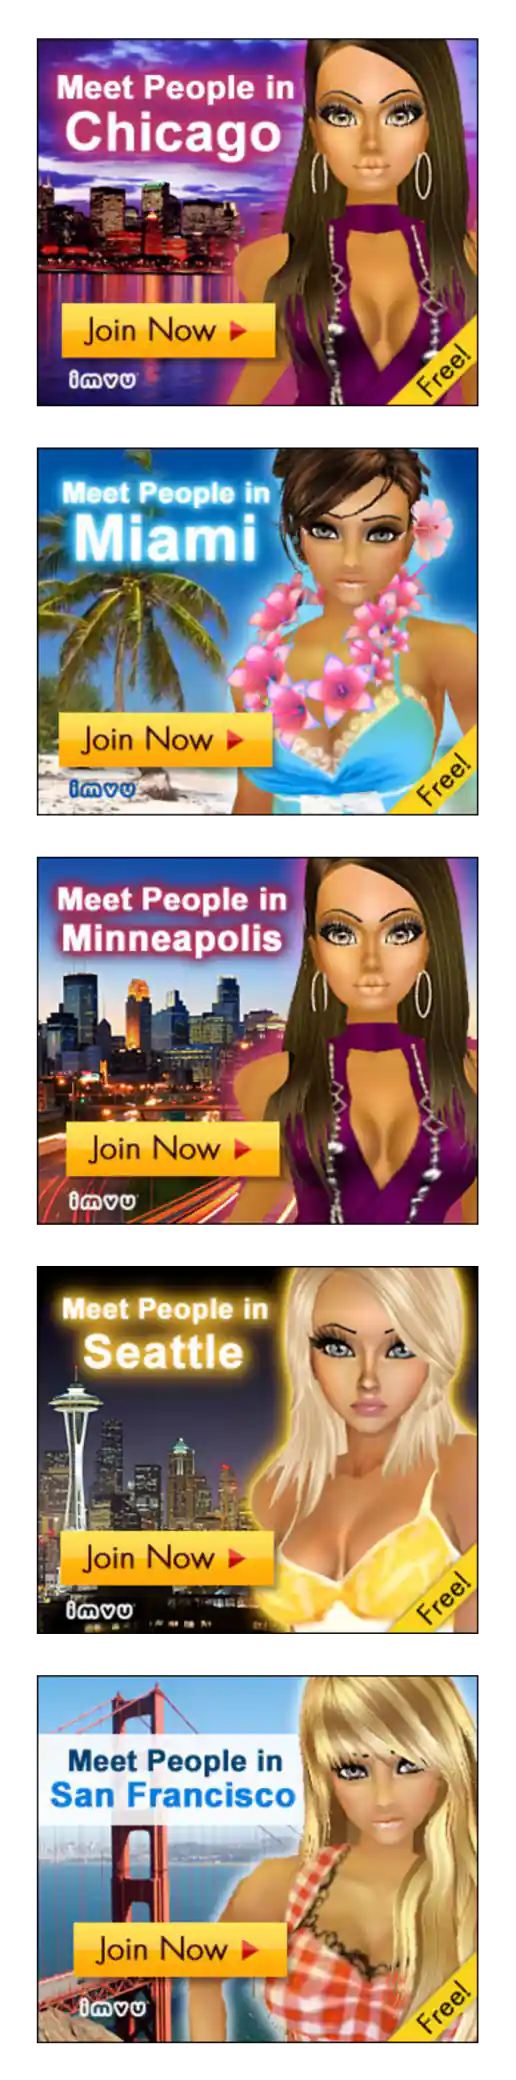 IMVU Geo-targeted U.S Cityscape Banner Ads project image